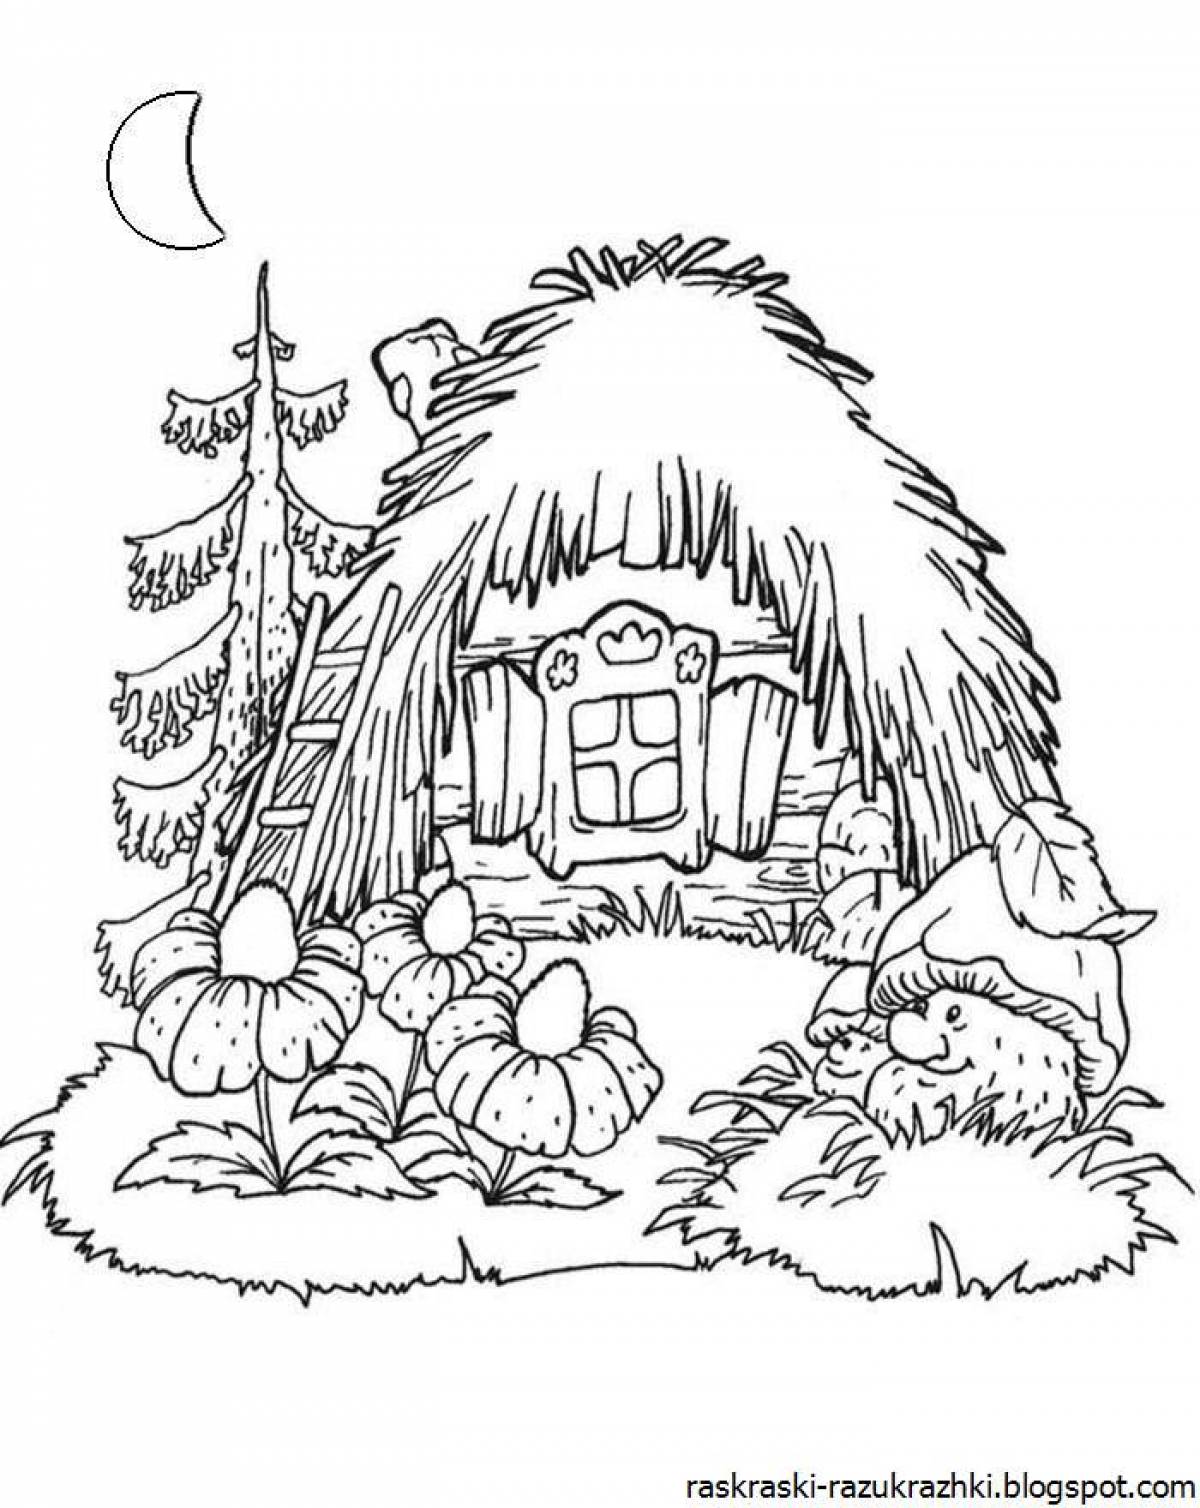 Coloring page serene hut